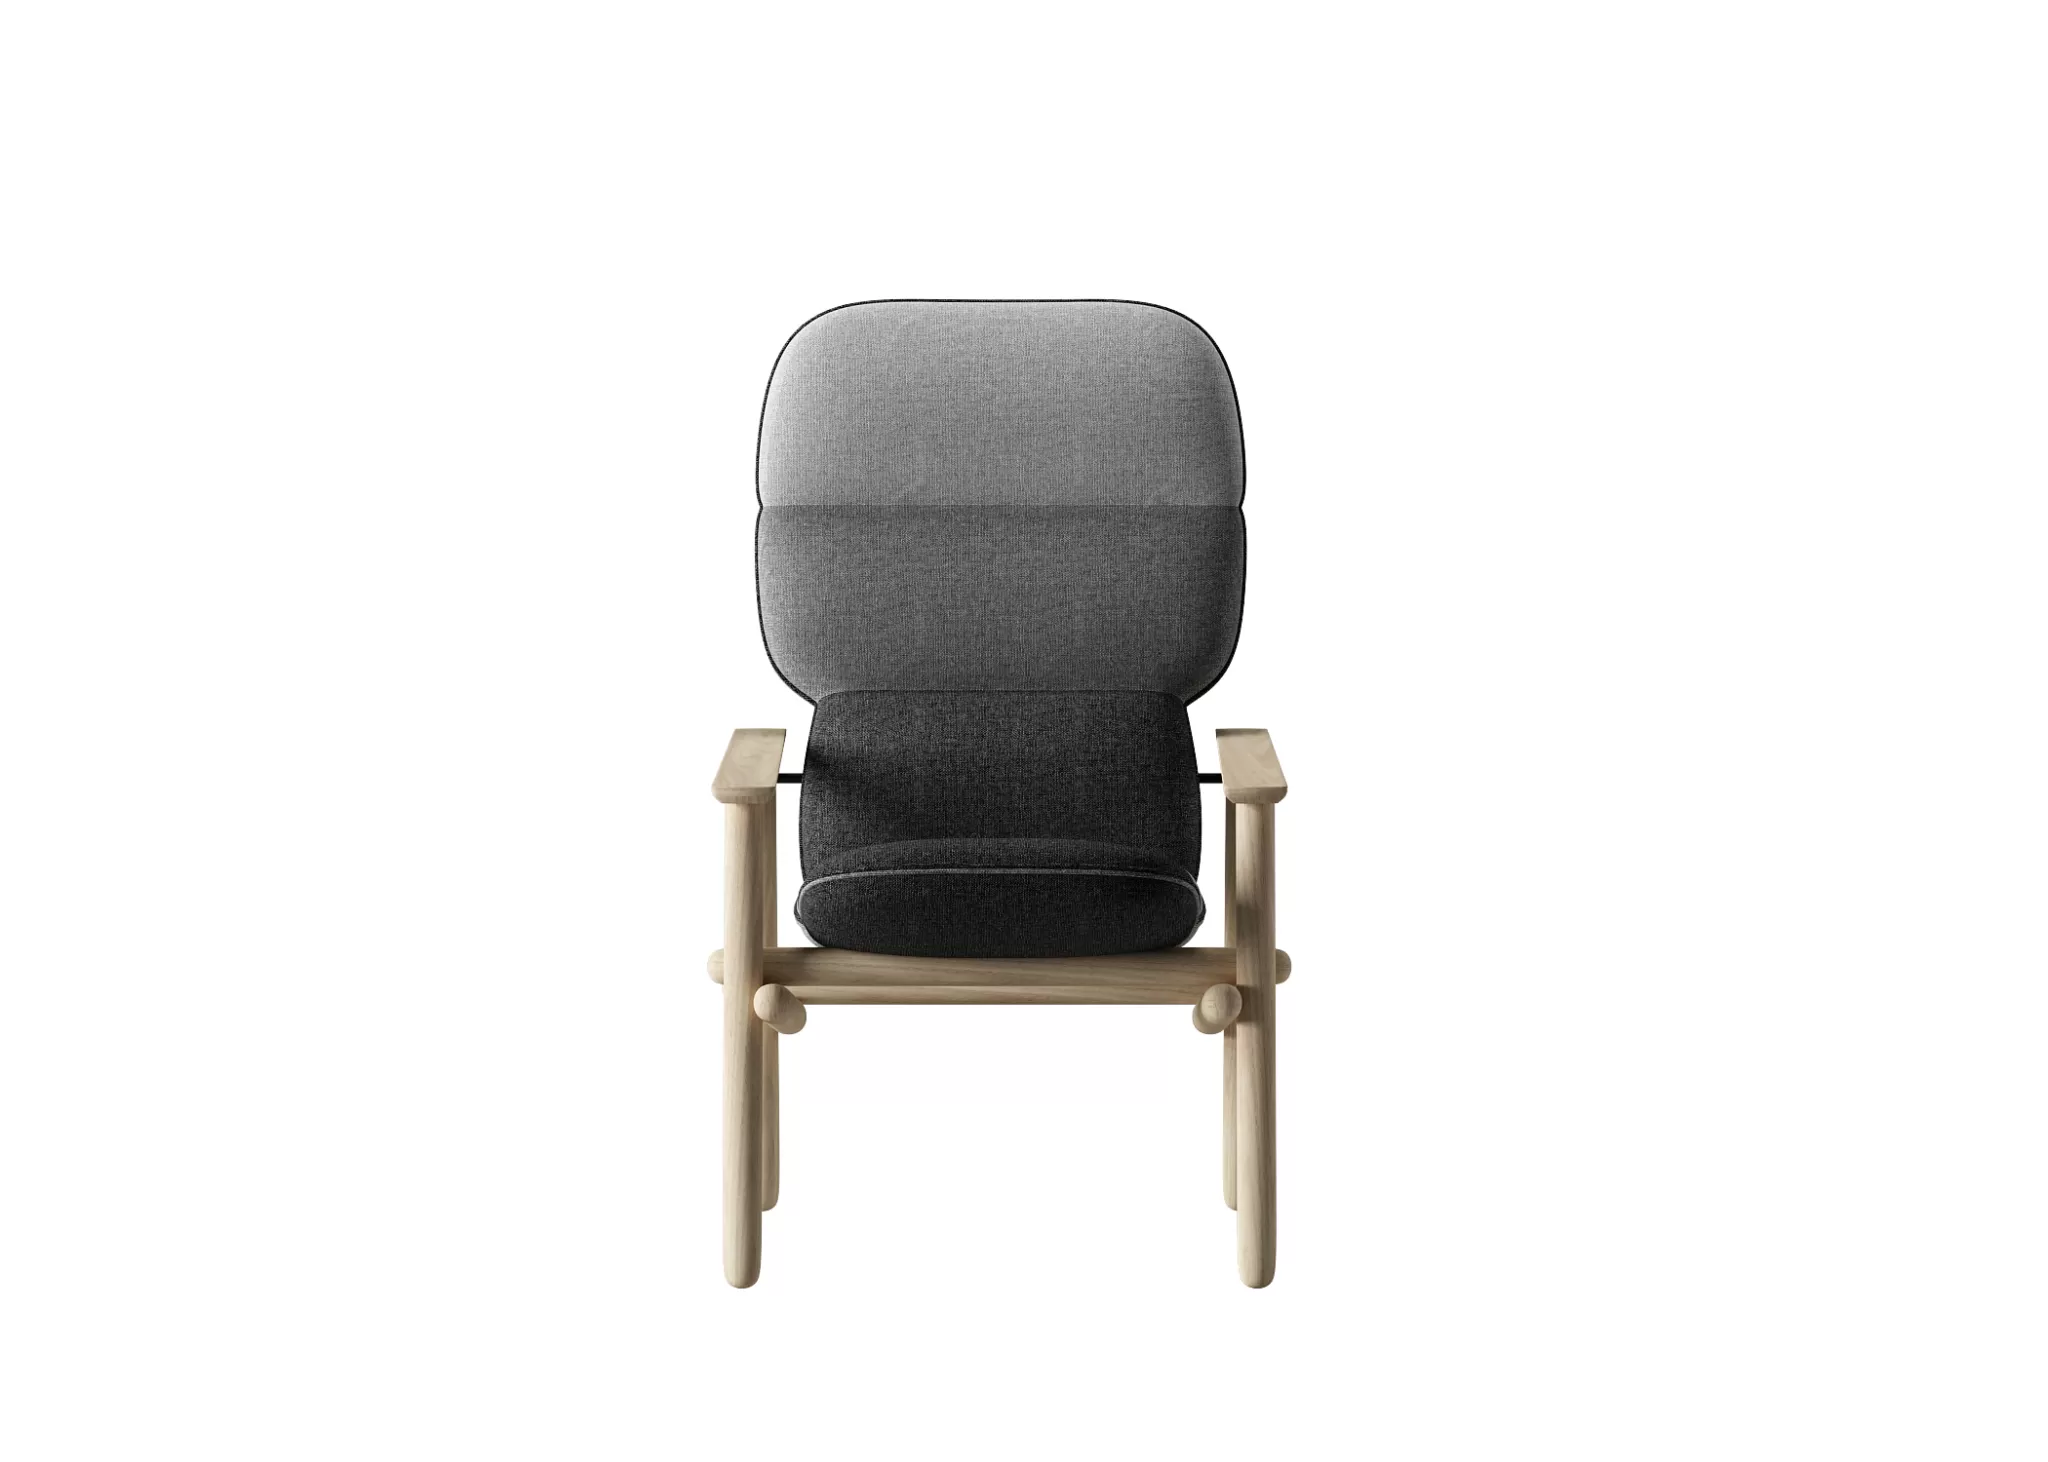 FURNITURE 3D MODELS – CHAIRS – 0104